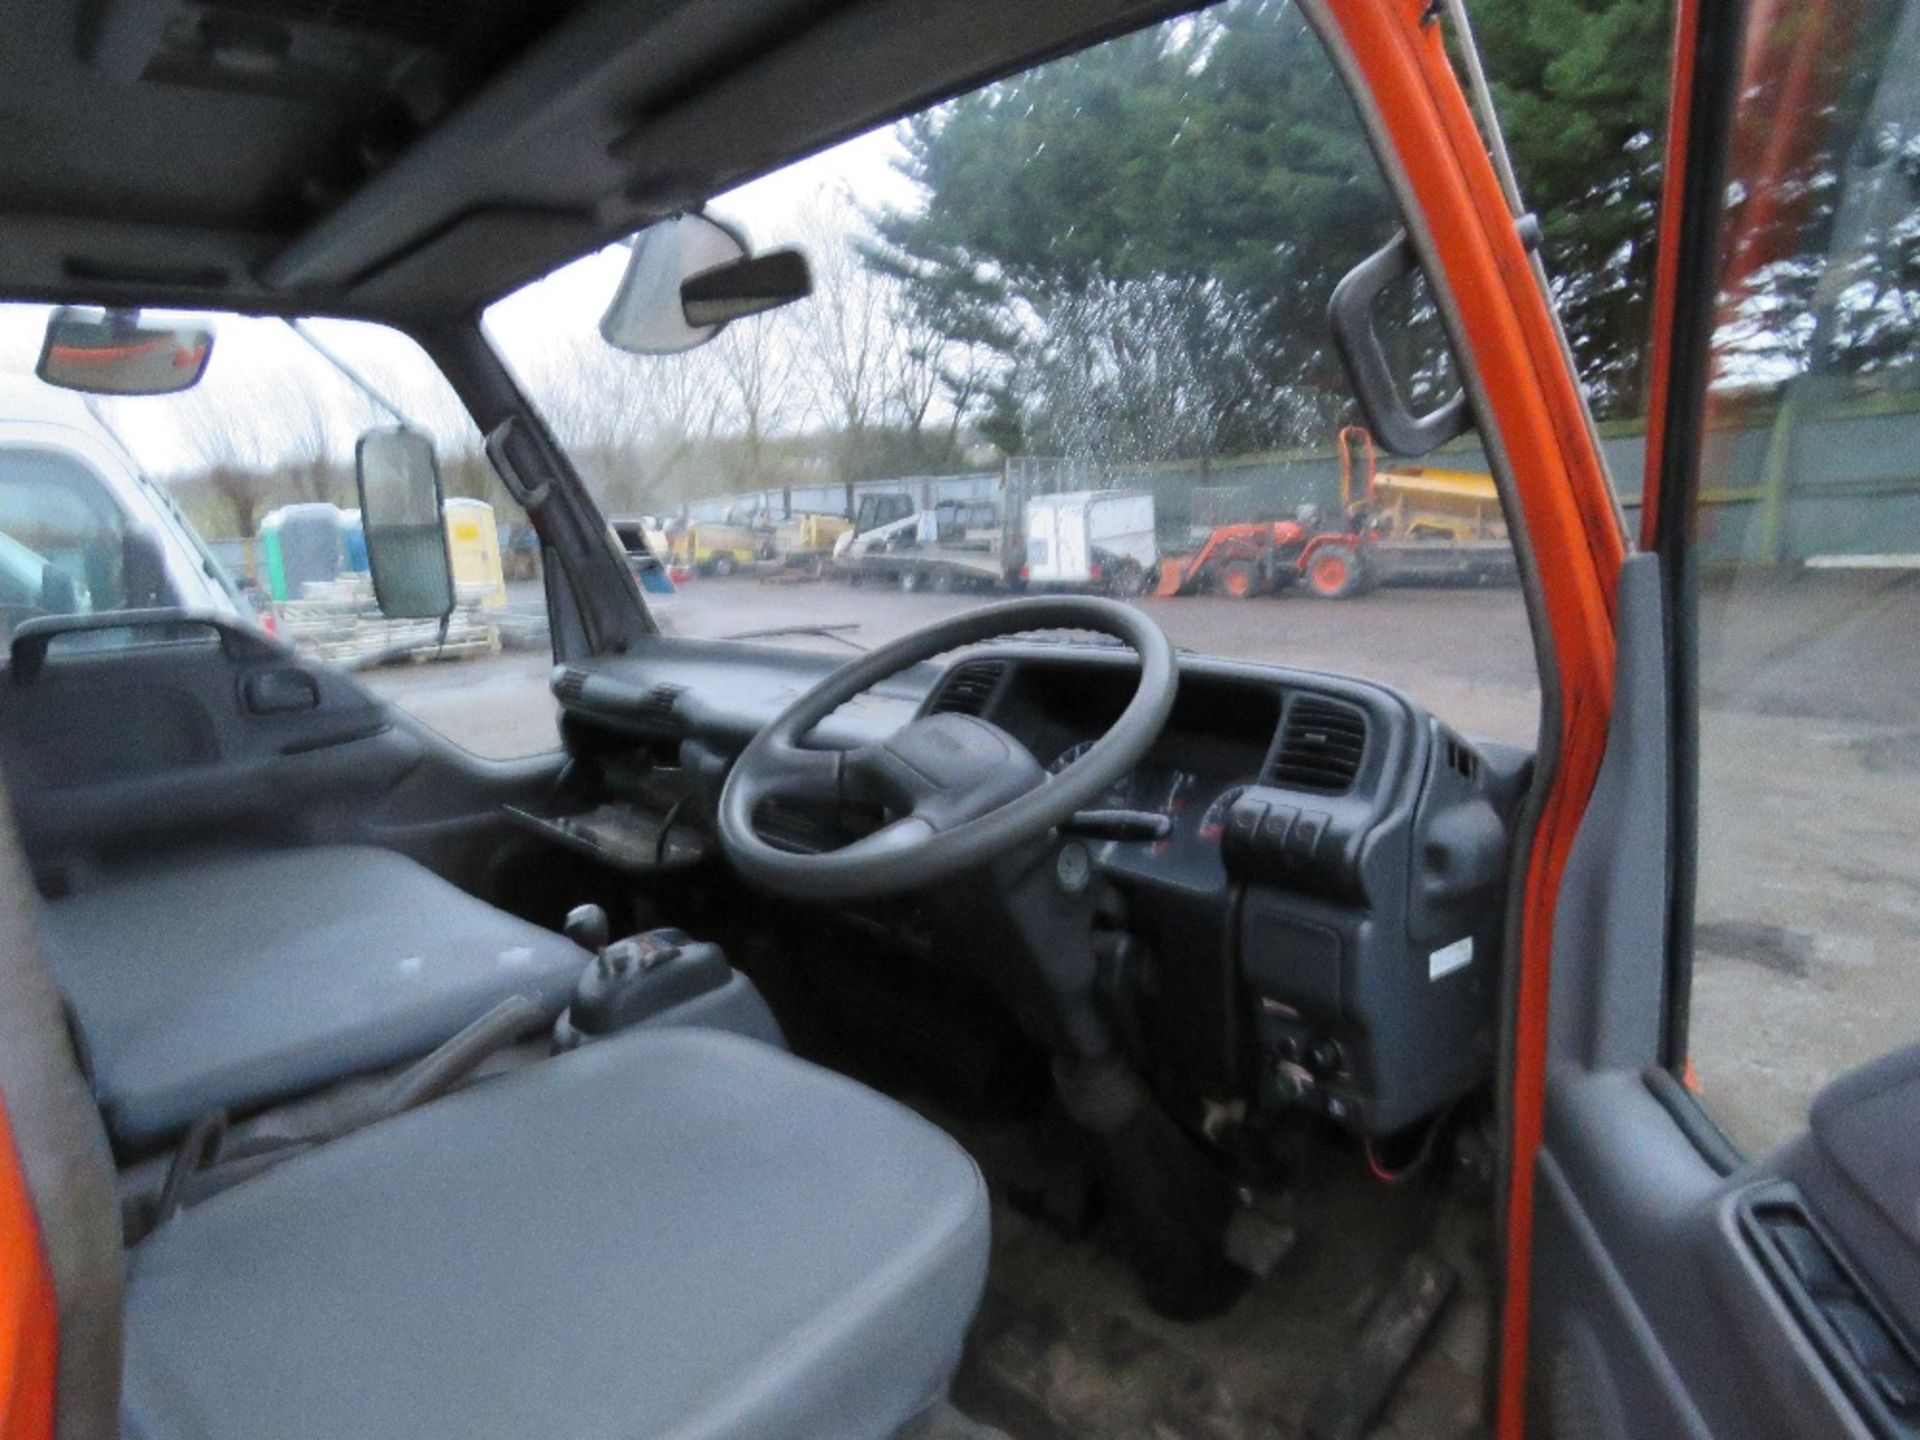 ISUZU DOUBLE CAB EASYSHIFT GEARBOX 7500KG RATED CHASSIS CAB LORRY. REG KE57 CZH. 12FT LENGTH OF CHAS - Image 8 of 9